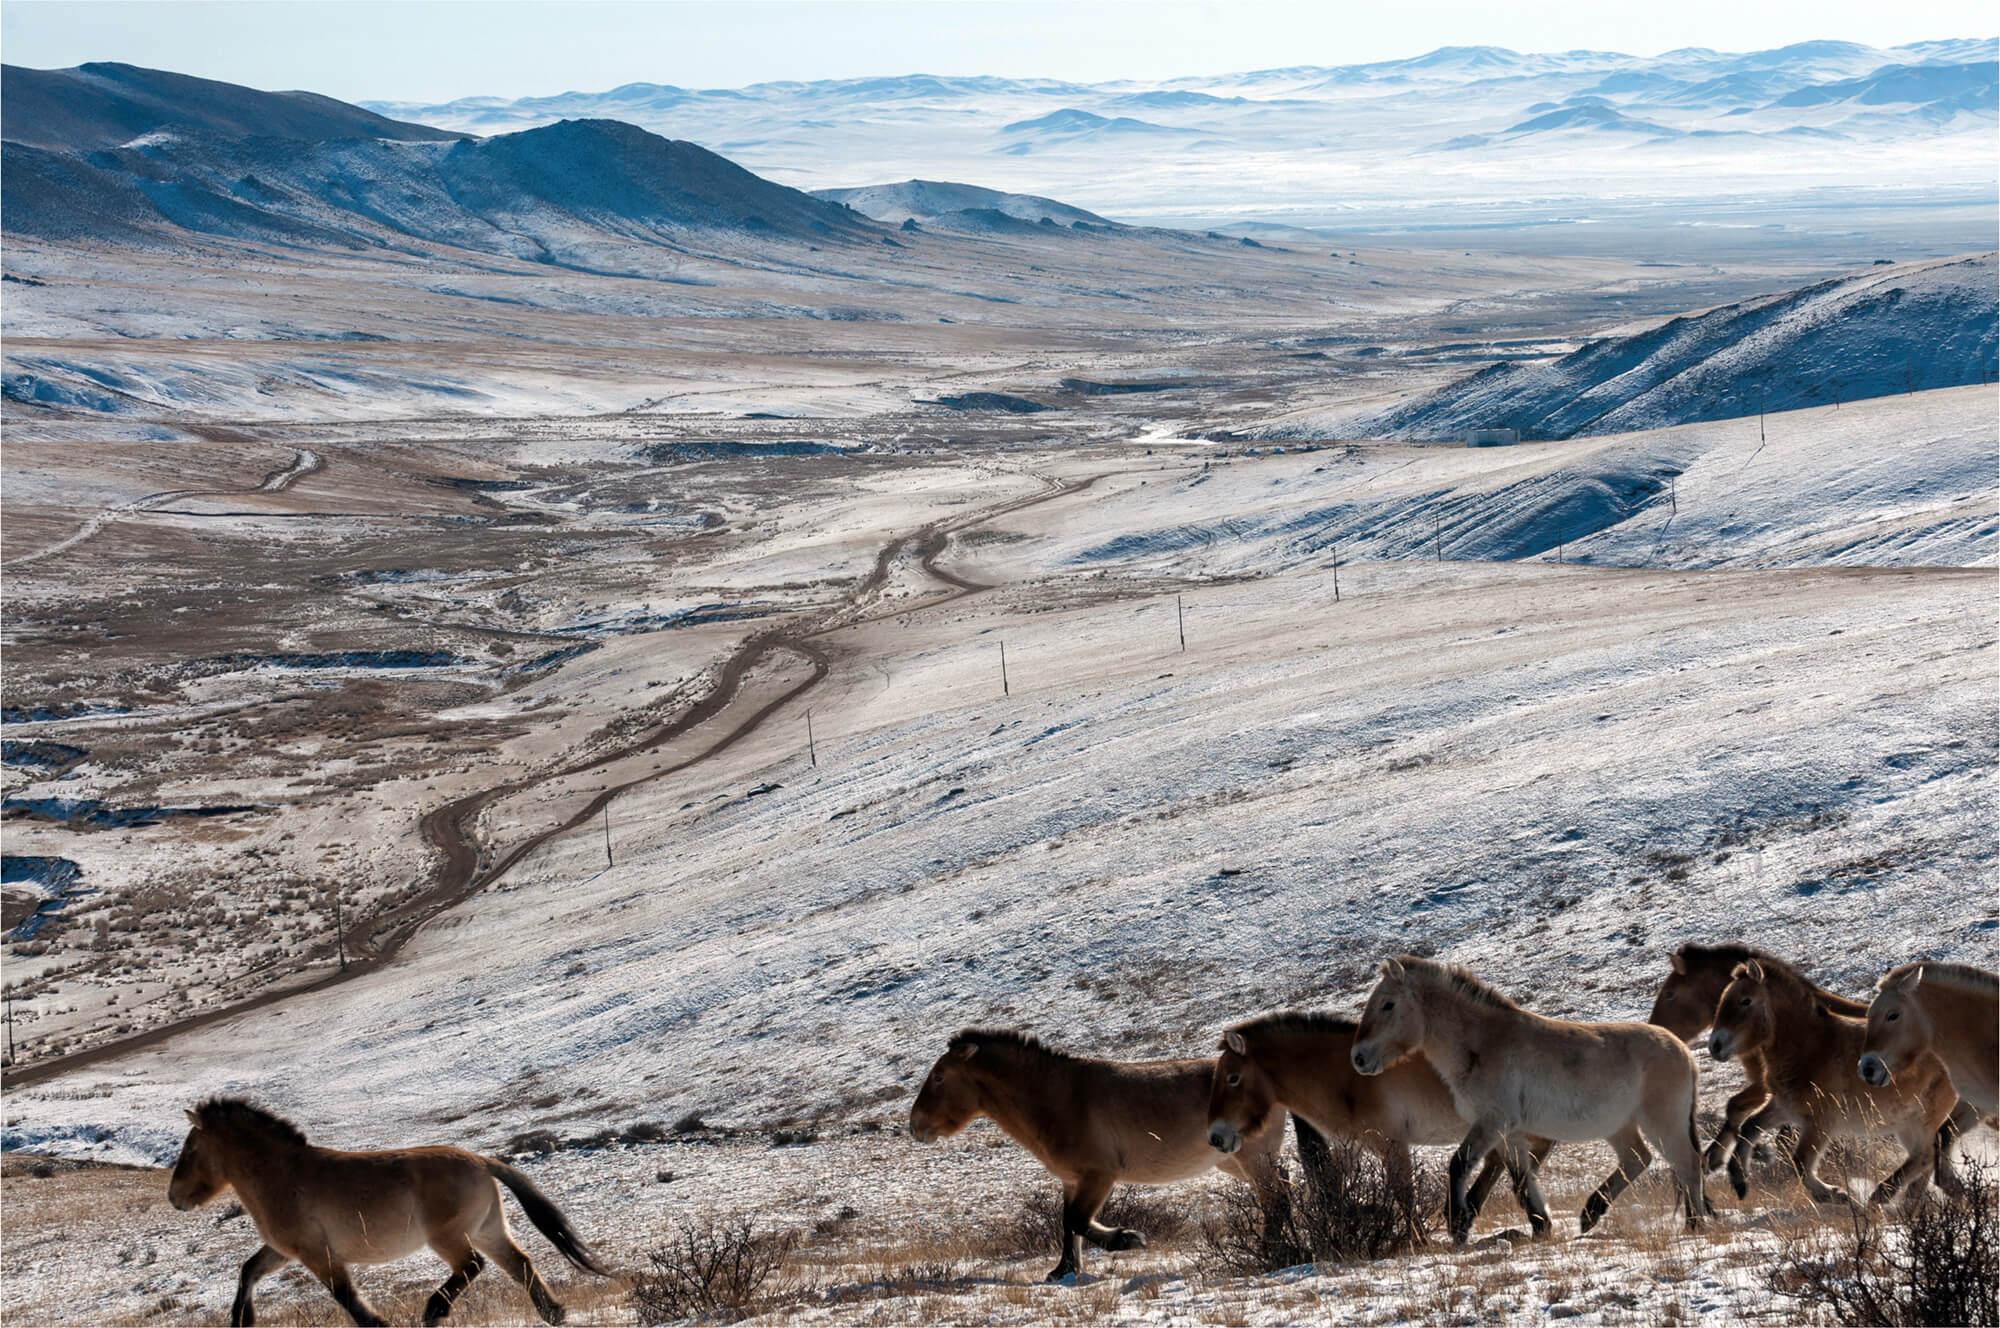 A herd of Asiatic Wild Horse, Przewalski or Takhi (as known to the locals) with views of vast landscapes in Hustai National Park, Mongolia. Photographer: Astrid Harrisson. Location: Mongolia.